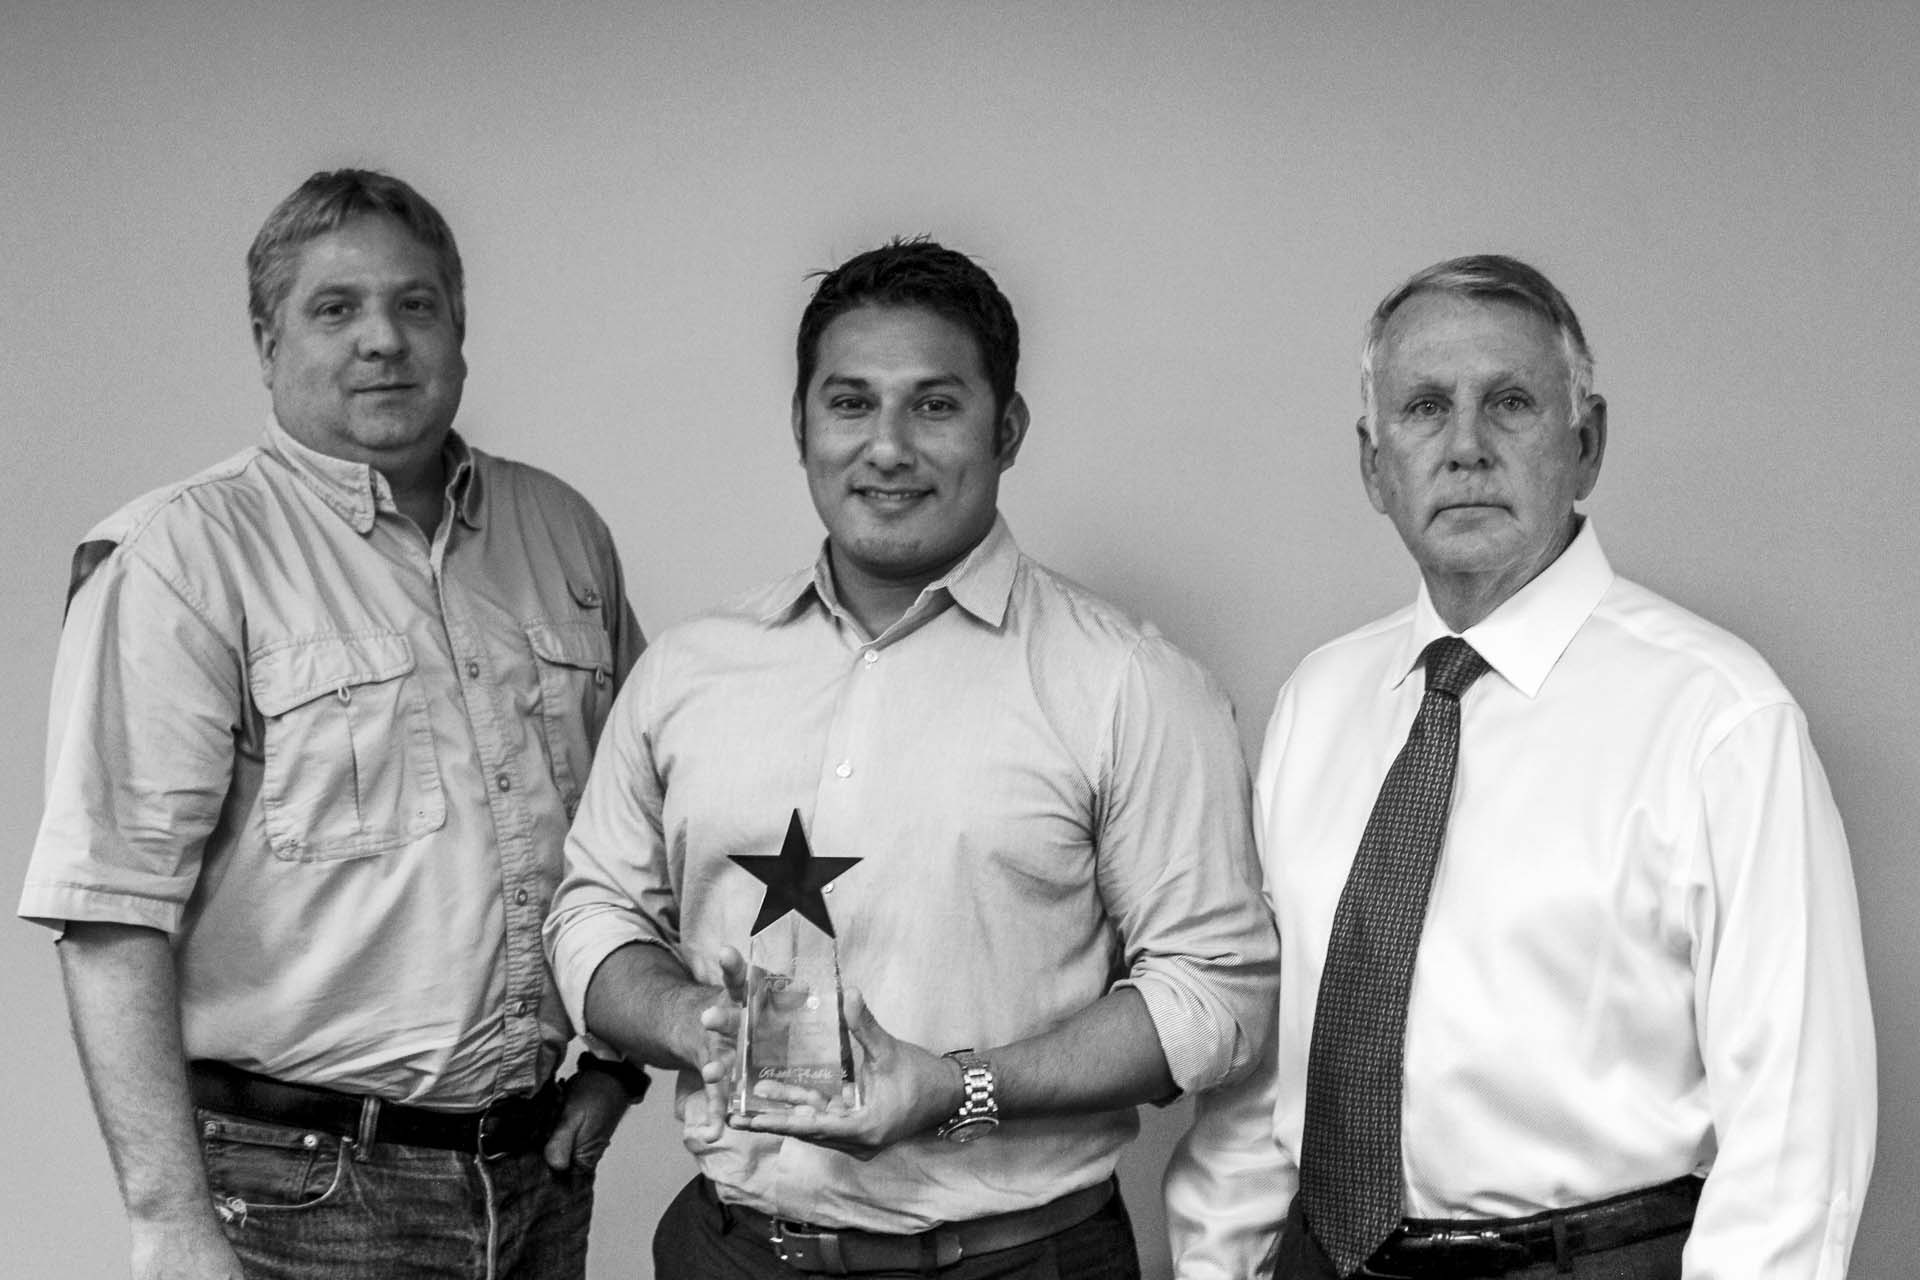 Tony Zuniga, Project Engineer (center), accepts the award for Pollution Prevention (P2) with Danny Jett, General Foreman (left), presented by Tom Cox, Deputy City Manager of Grand Prairie, Texas.